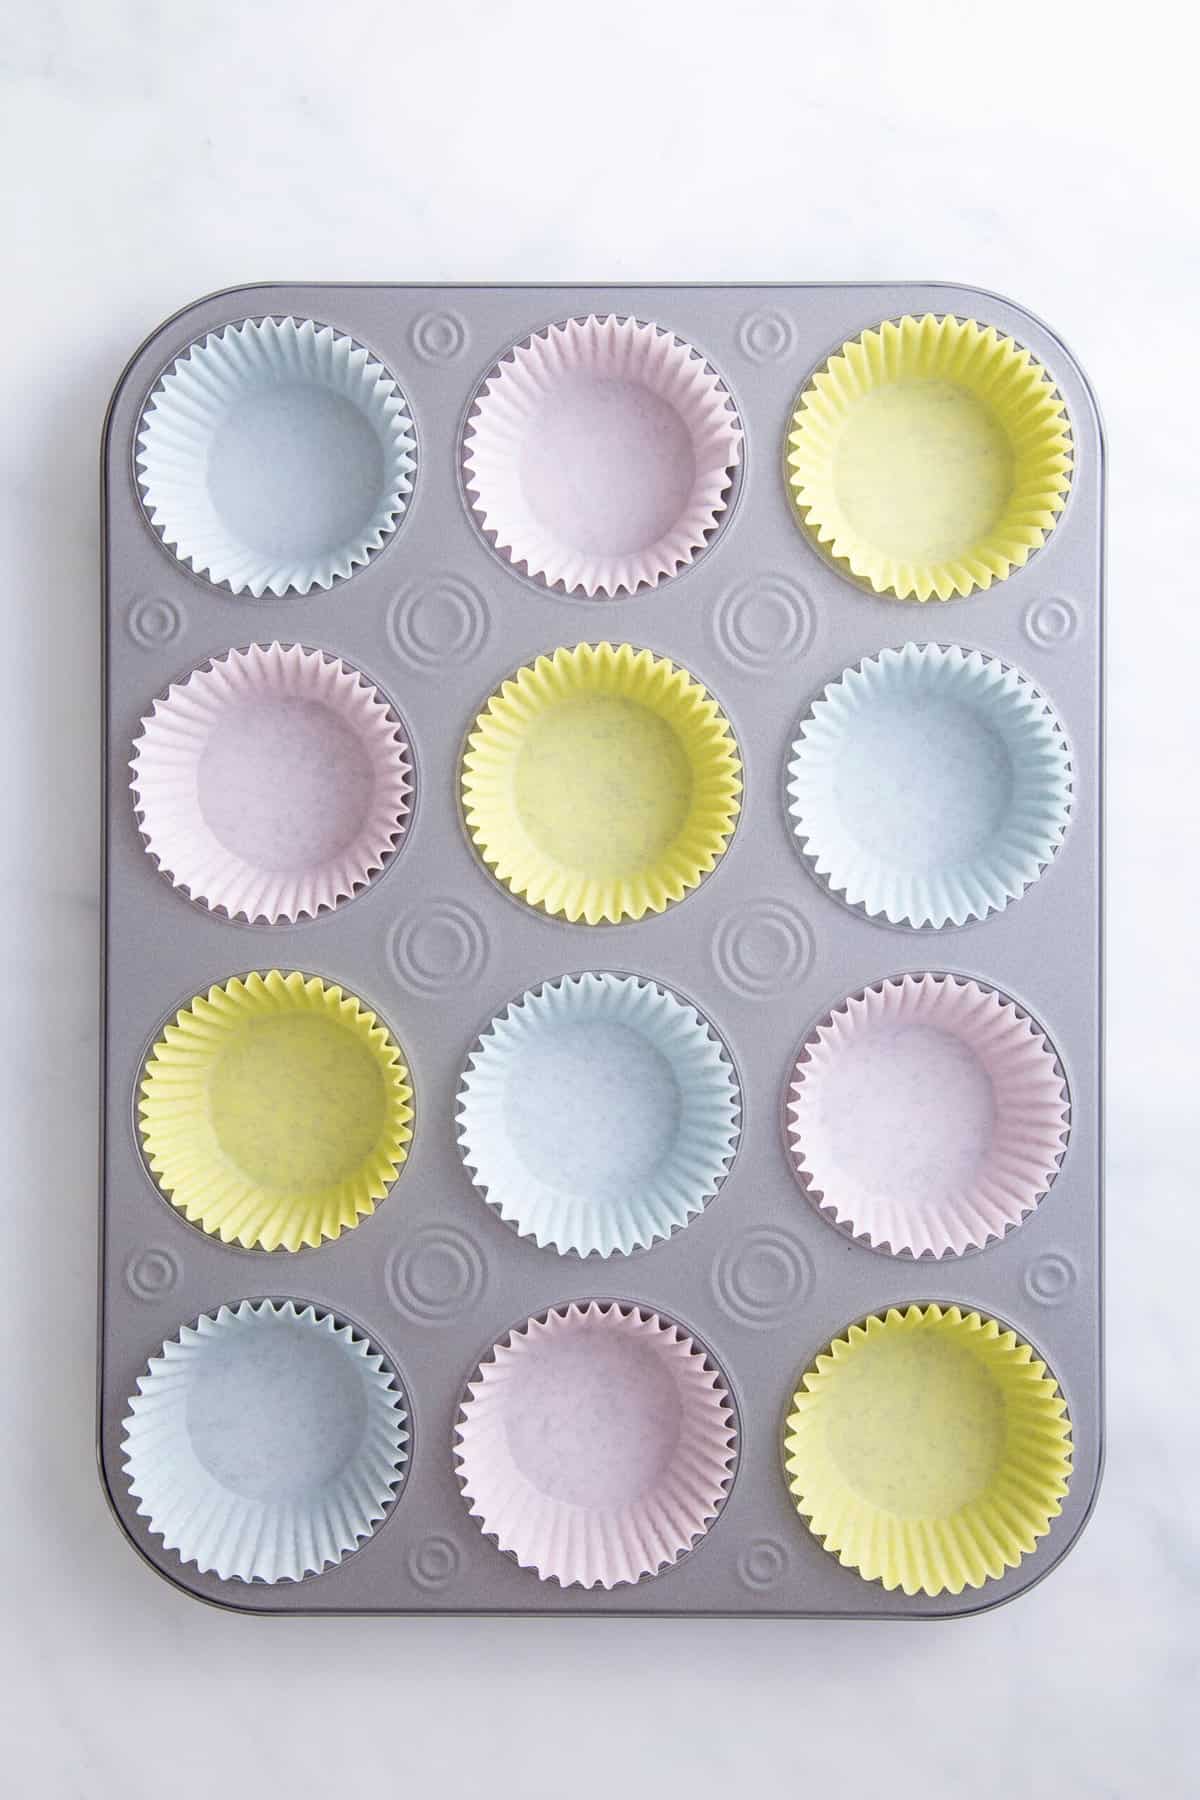 cupcake tin lined with 12 pastel colored cupcake liners